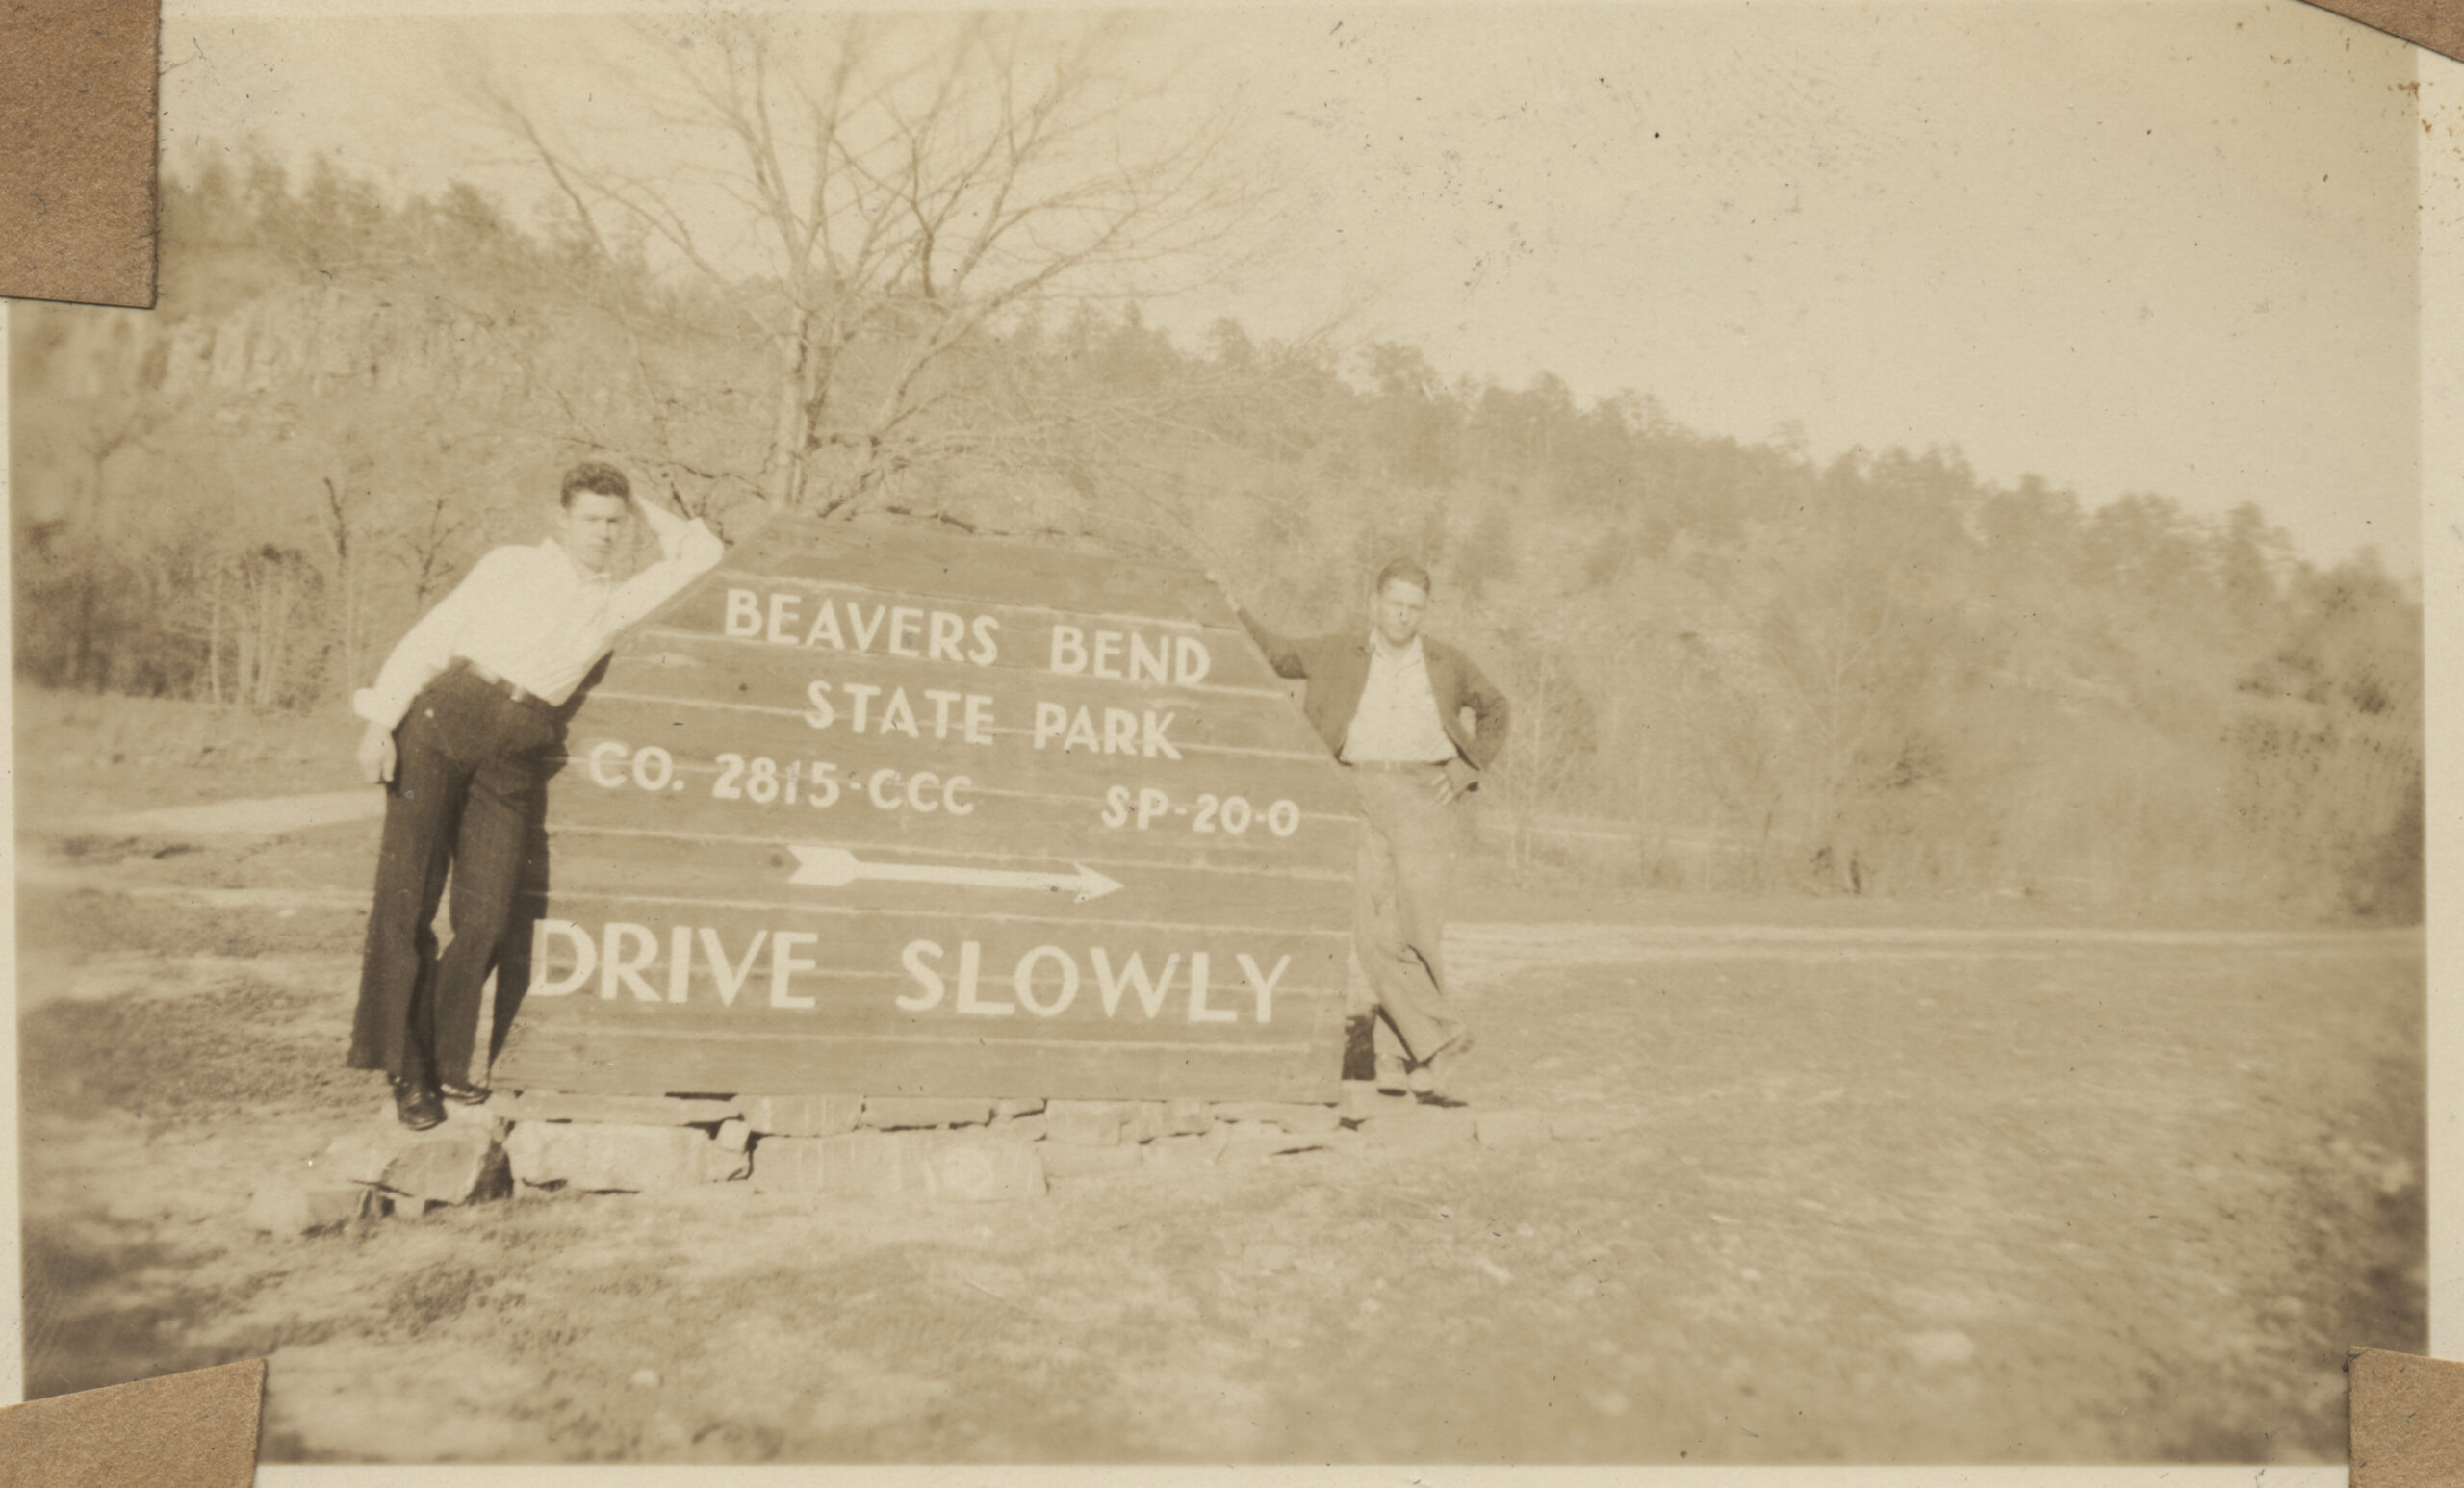 Historical image of the original Beavers Bend State Park sign